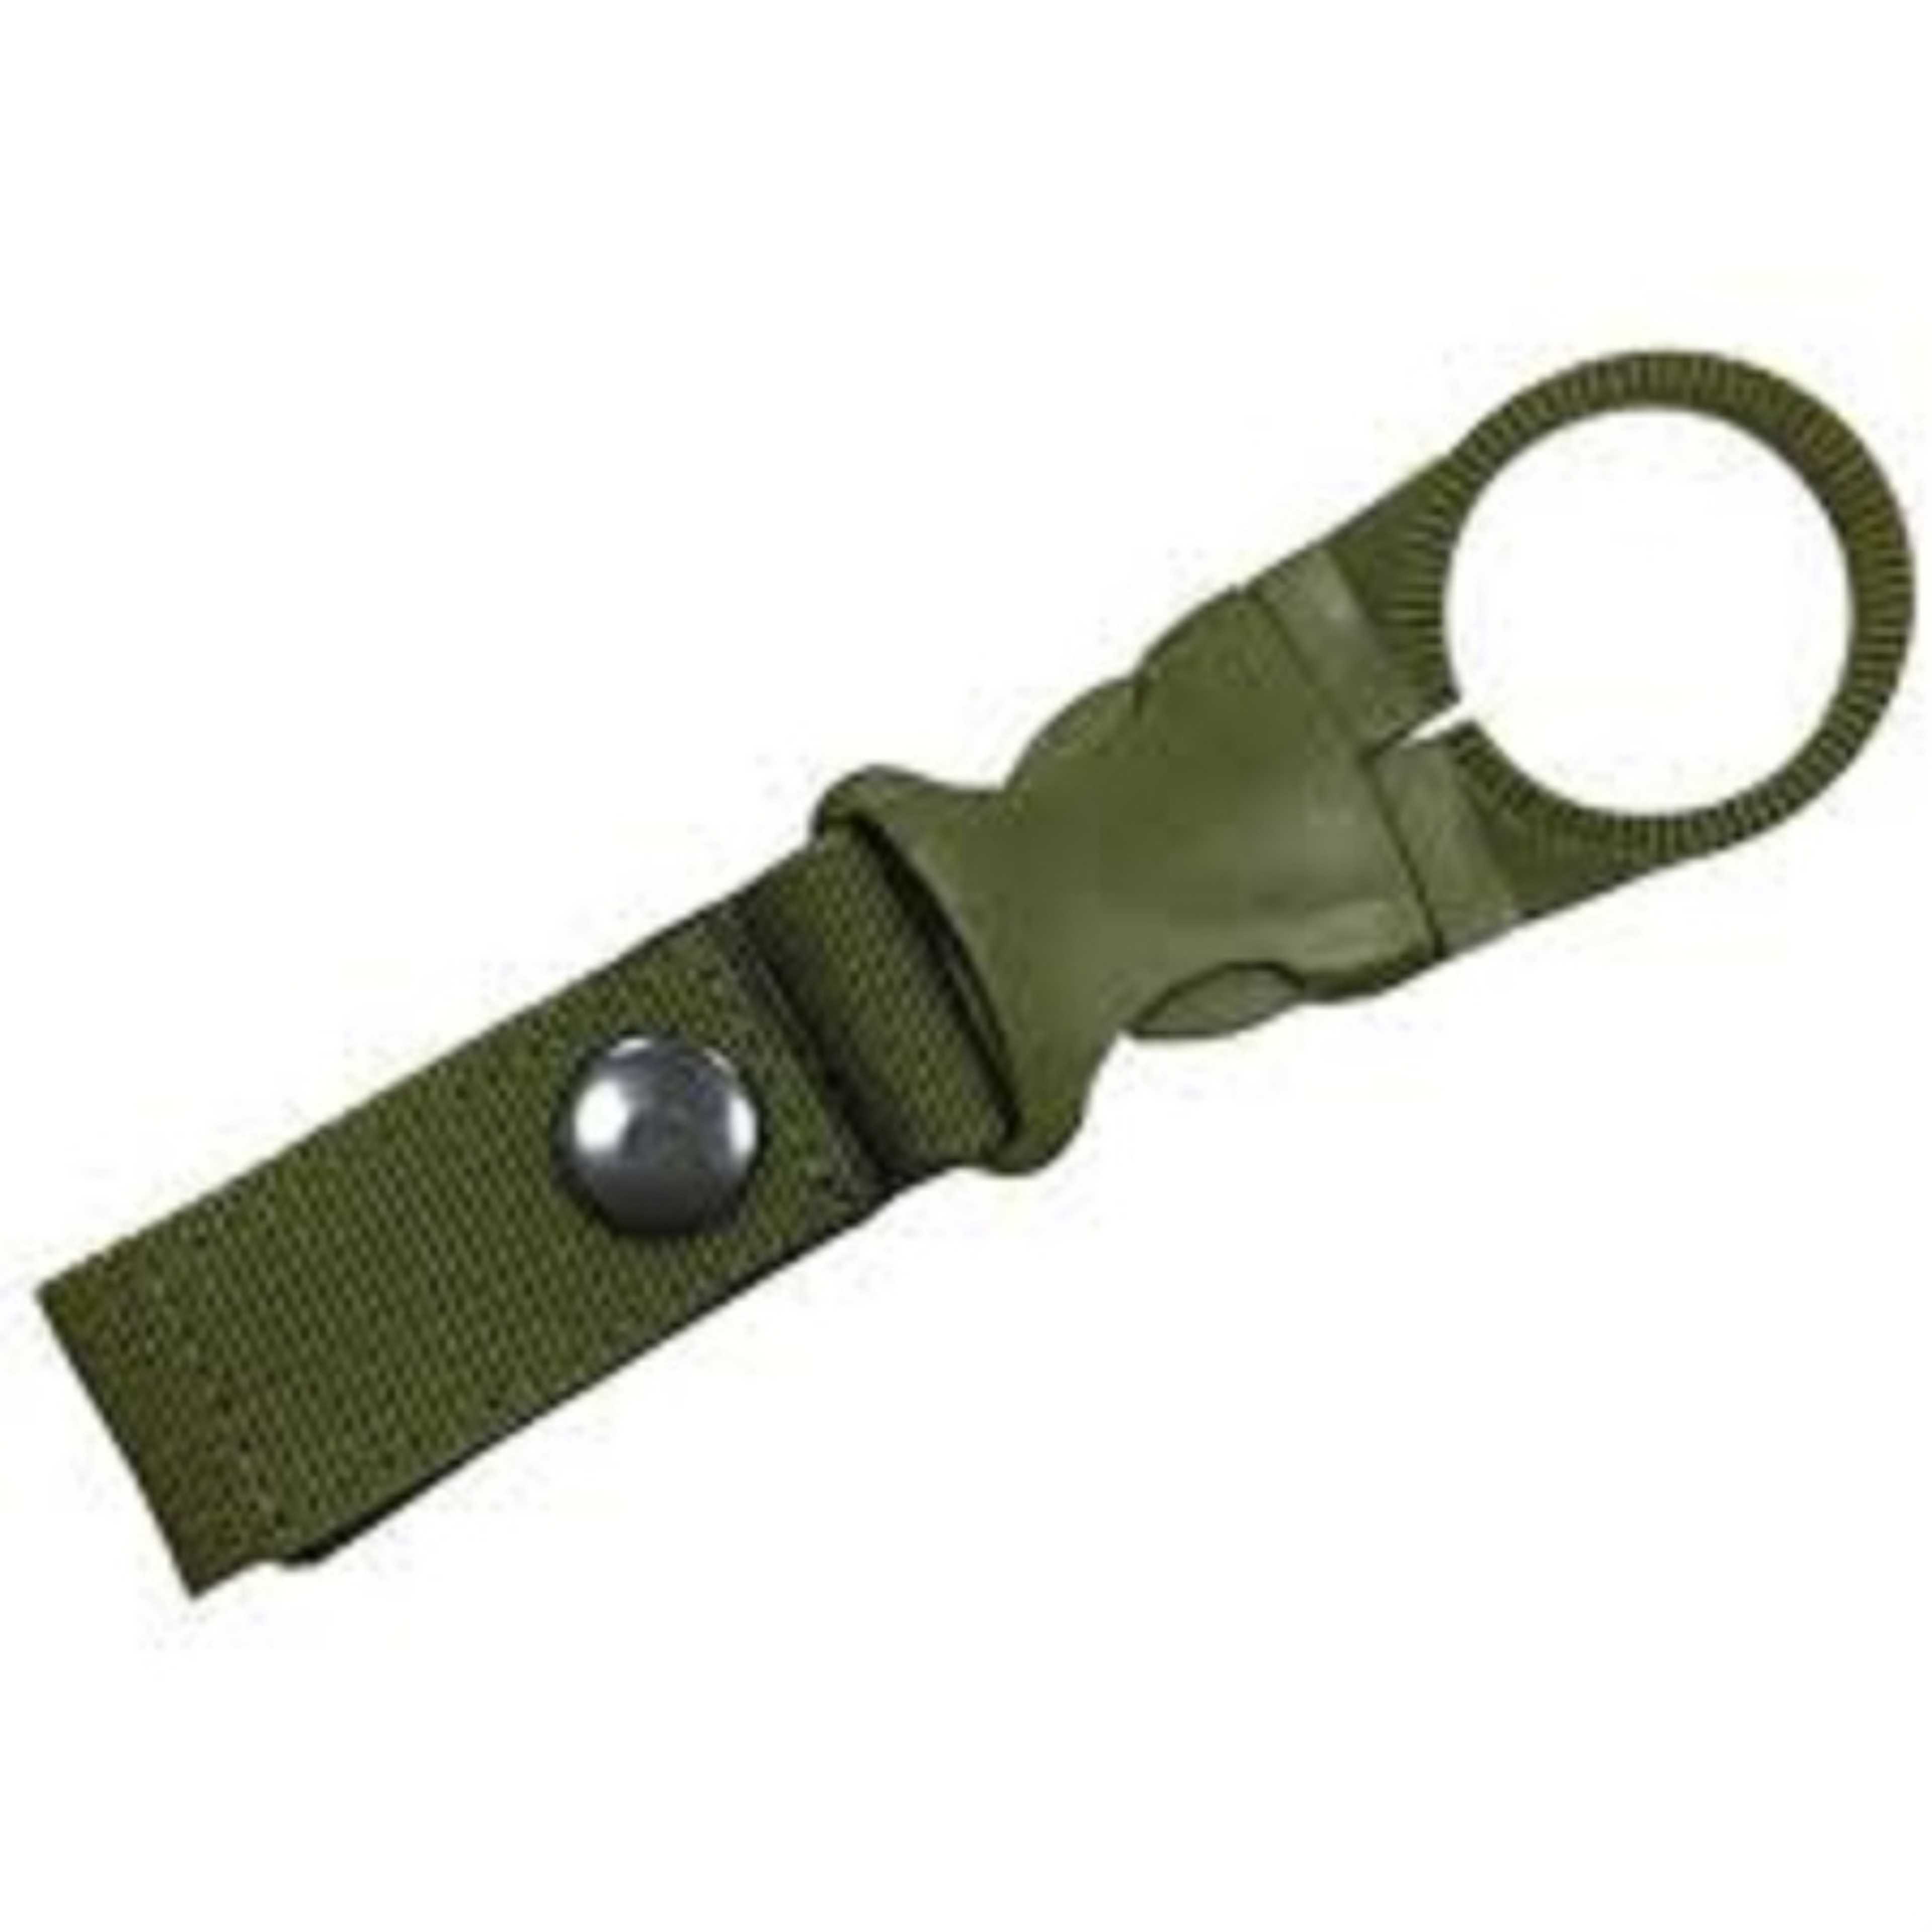 Water bottle holder, nylon buckle hook for outdoor use - 1pc Green